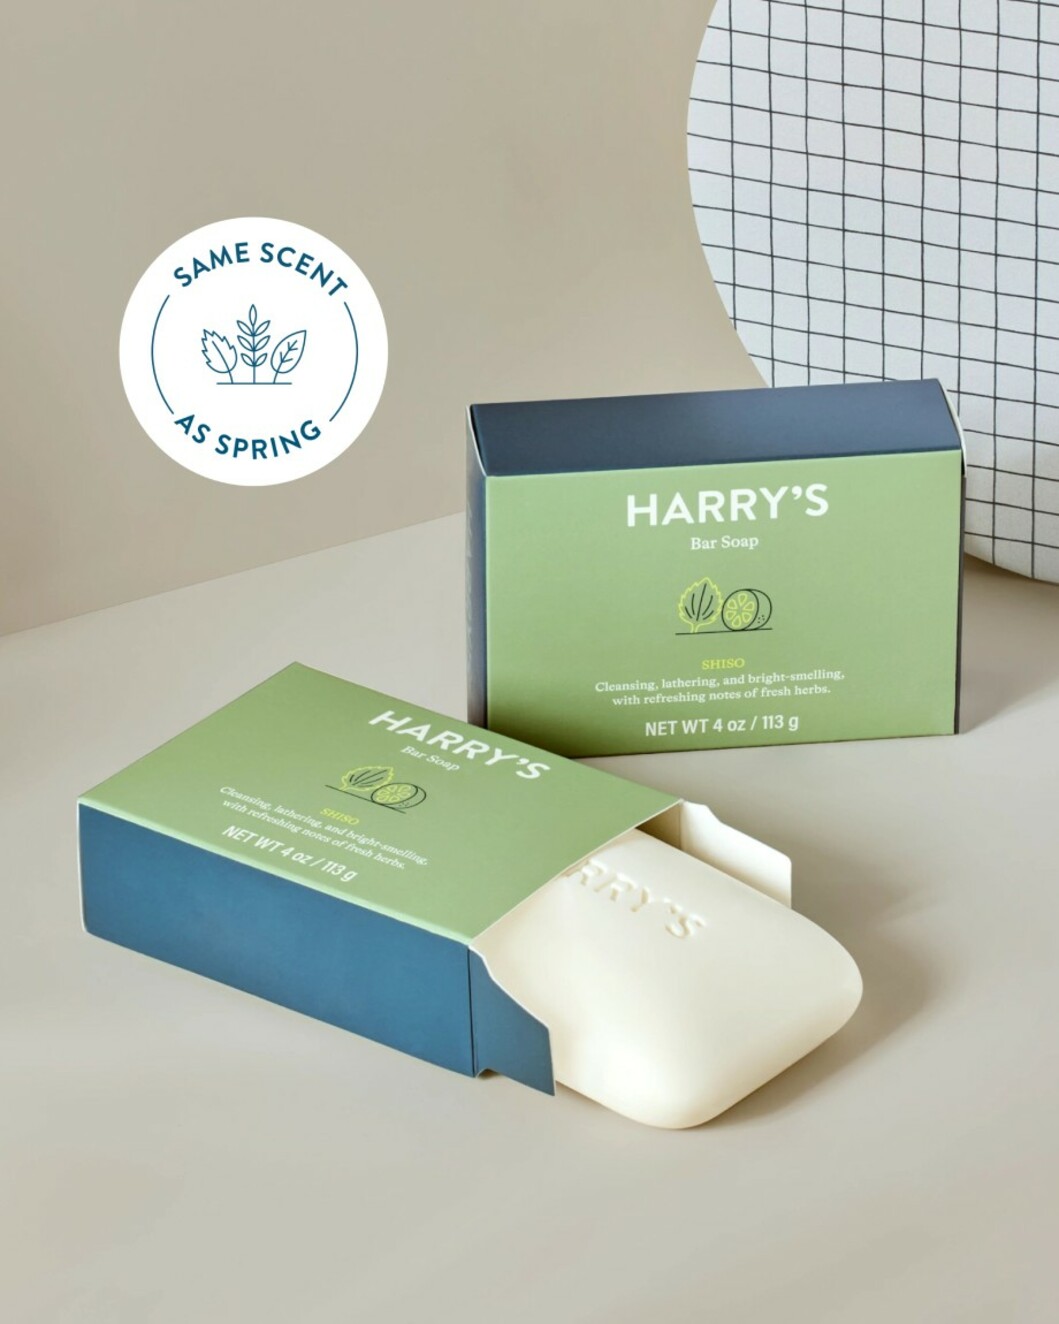 Harry's Bar Soap in Redwood Scent (2-pack) 113 g - CTC Health